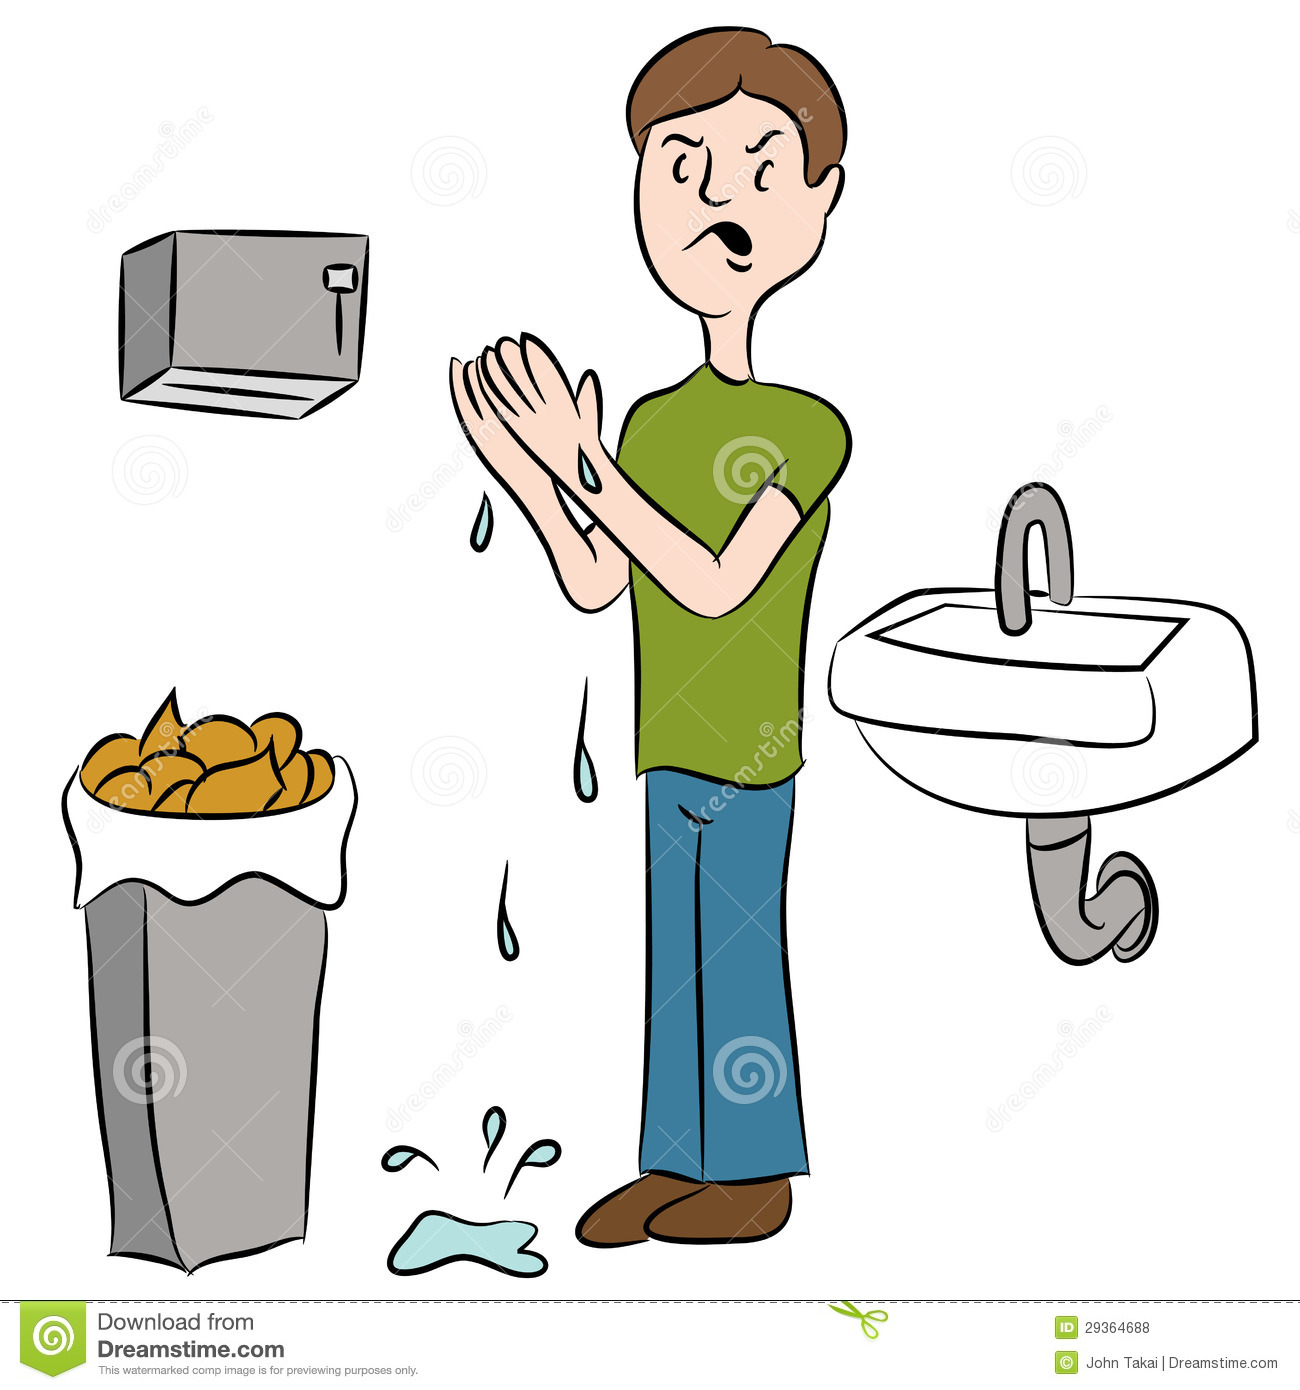 An Image Of A Man Trying To Dry His Wet Hands In A Bathroom